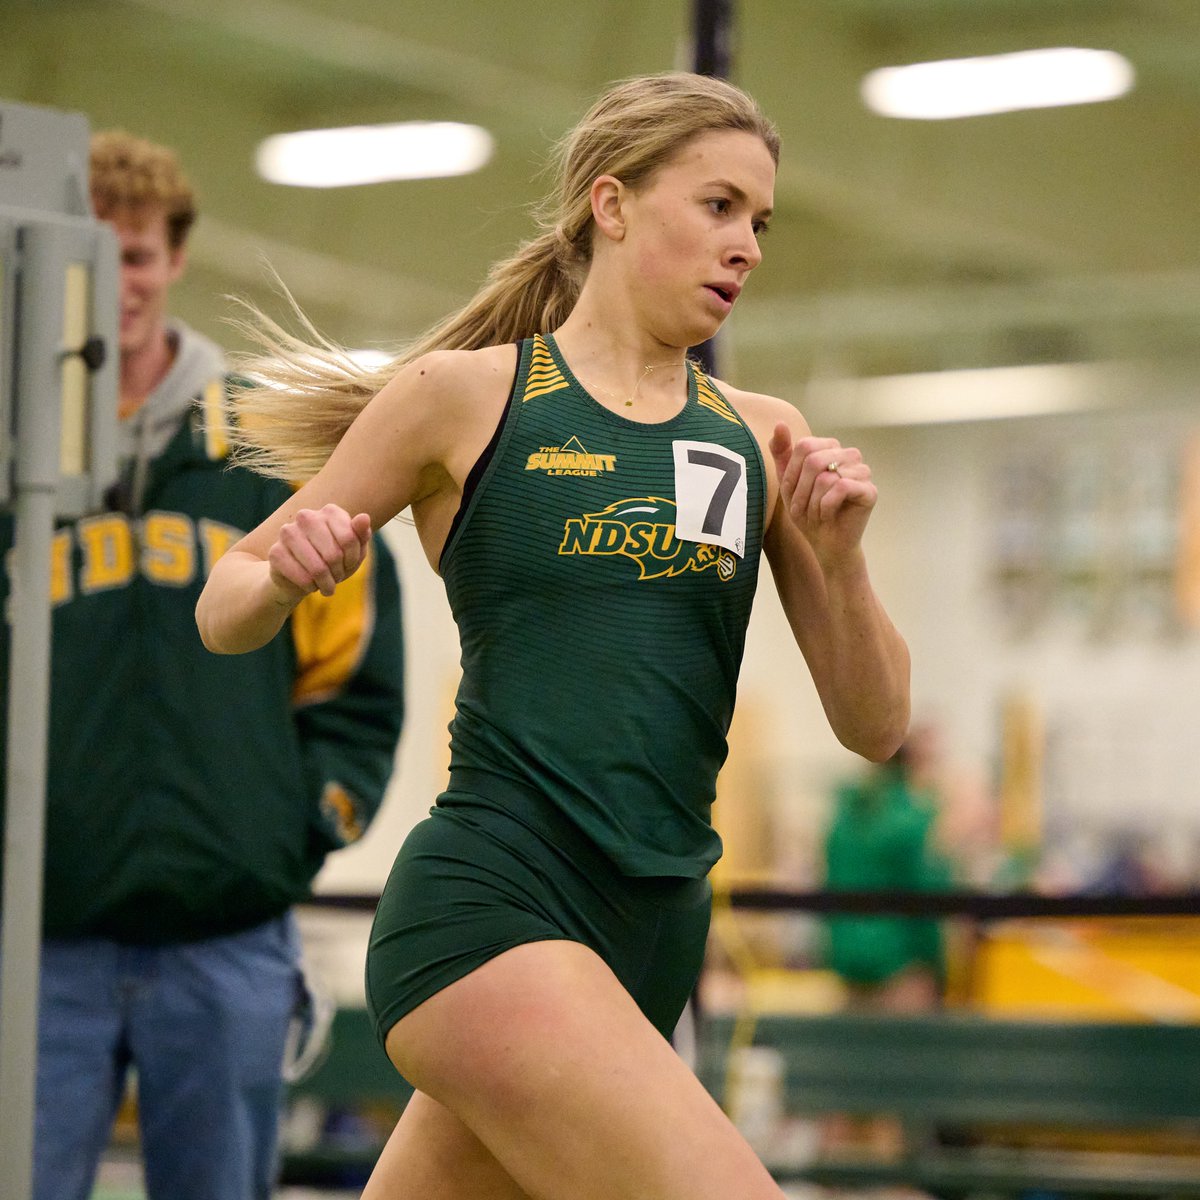 Brita Birkeland took 2nd in the 800m at the Summit League Championships, running a lifetime-best 2:10.31. Kate LeBlanc placed 6th, and Grace Link finished 8th.